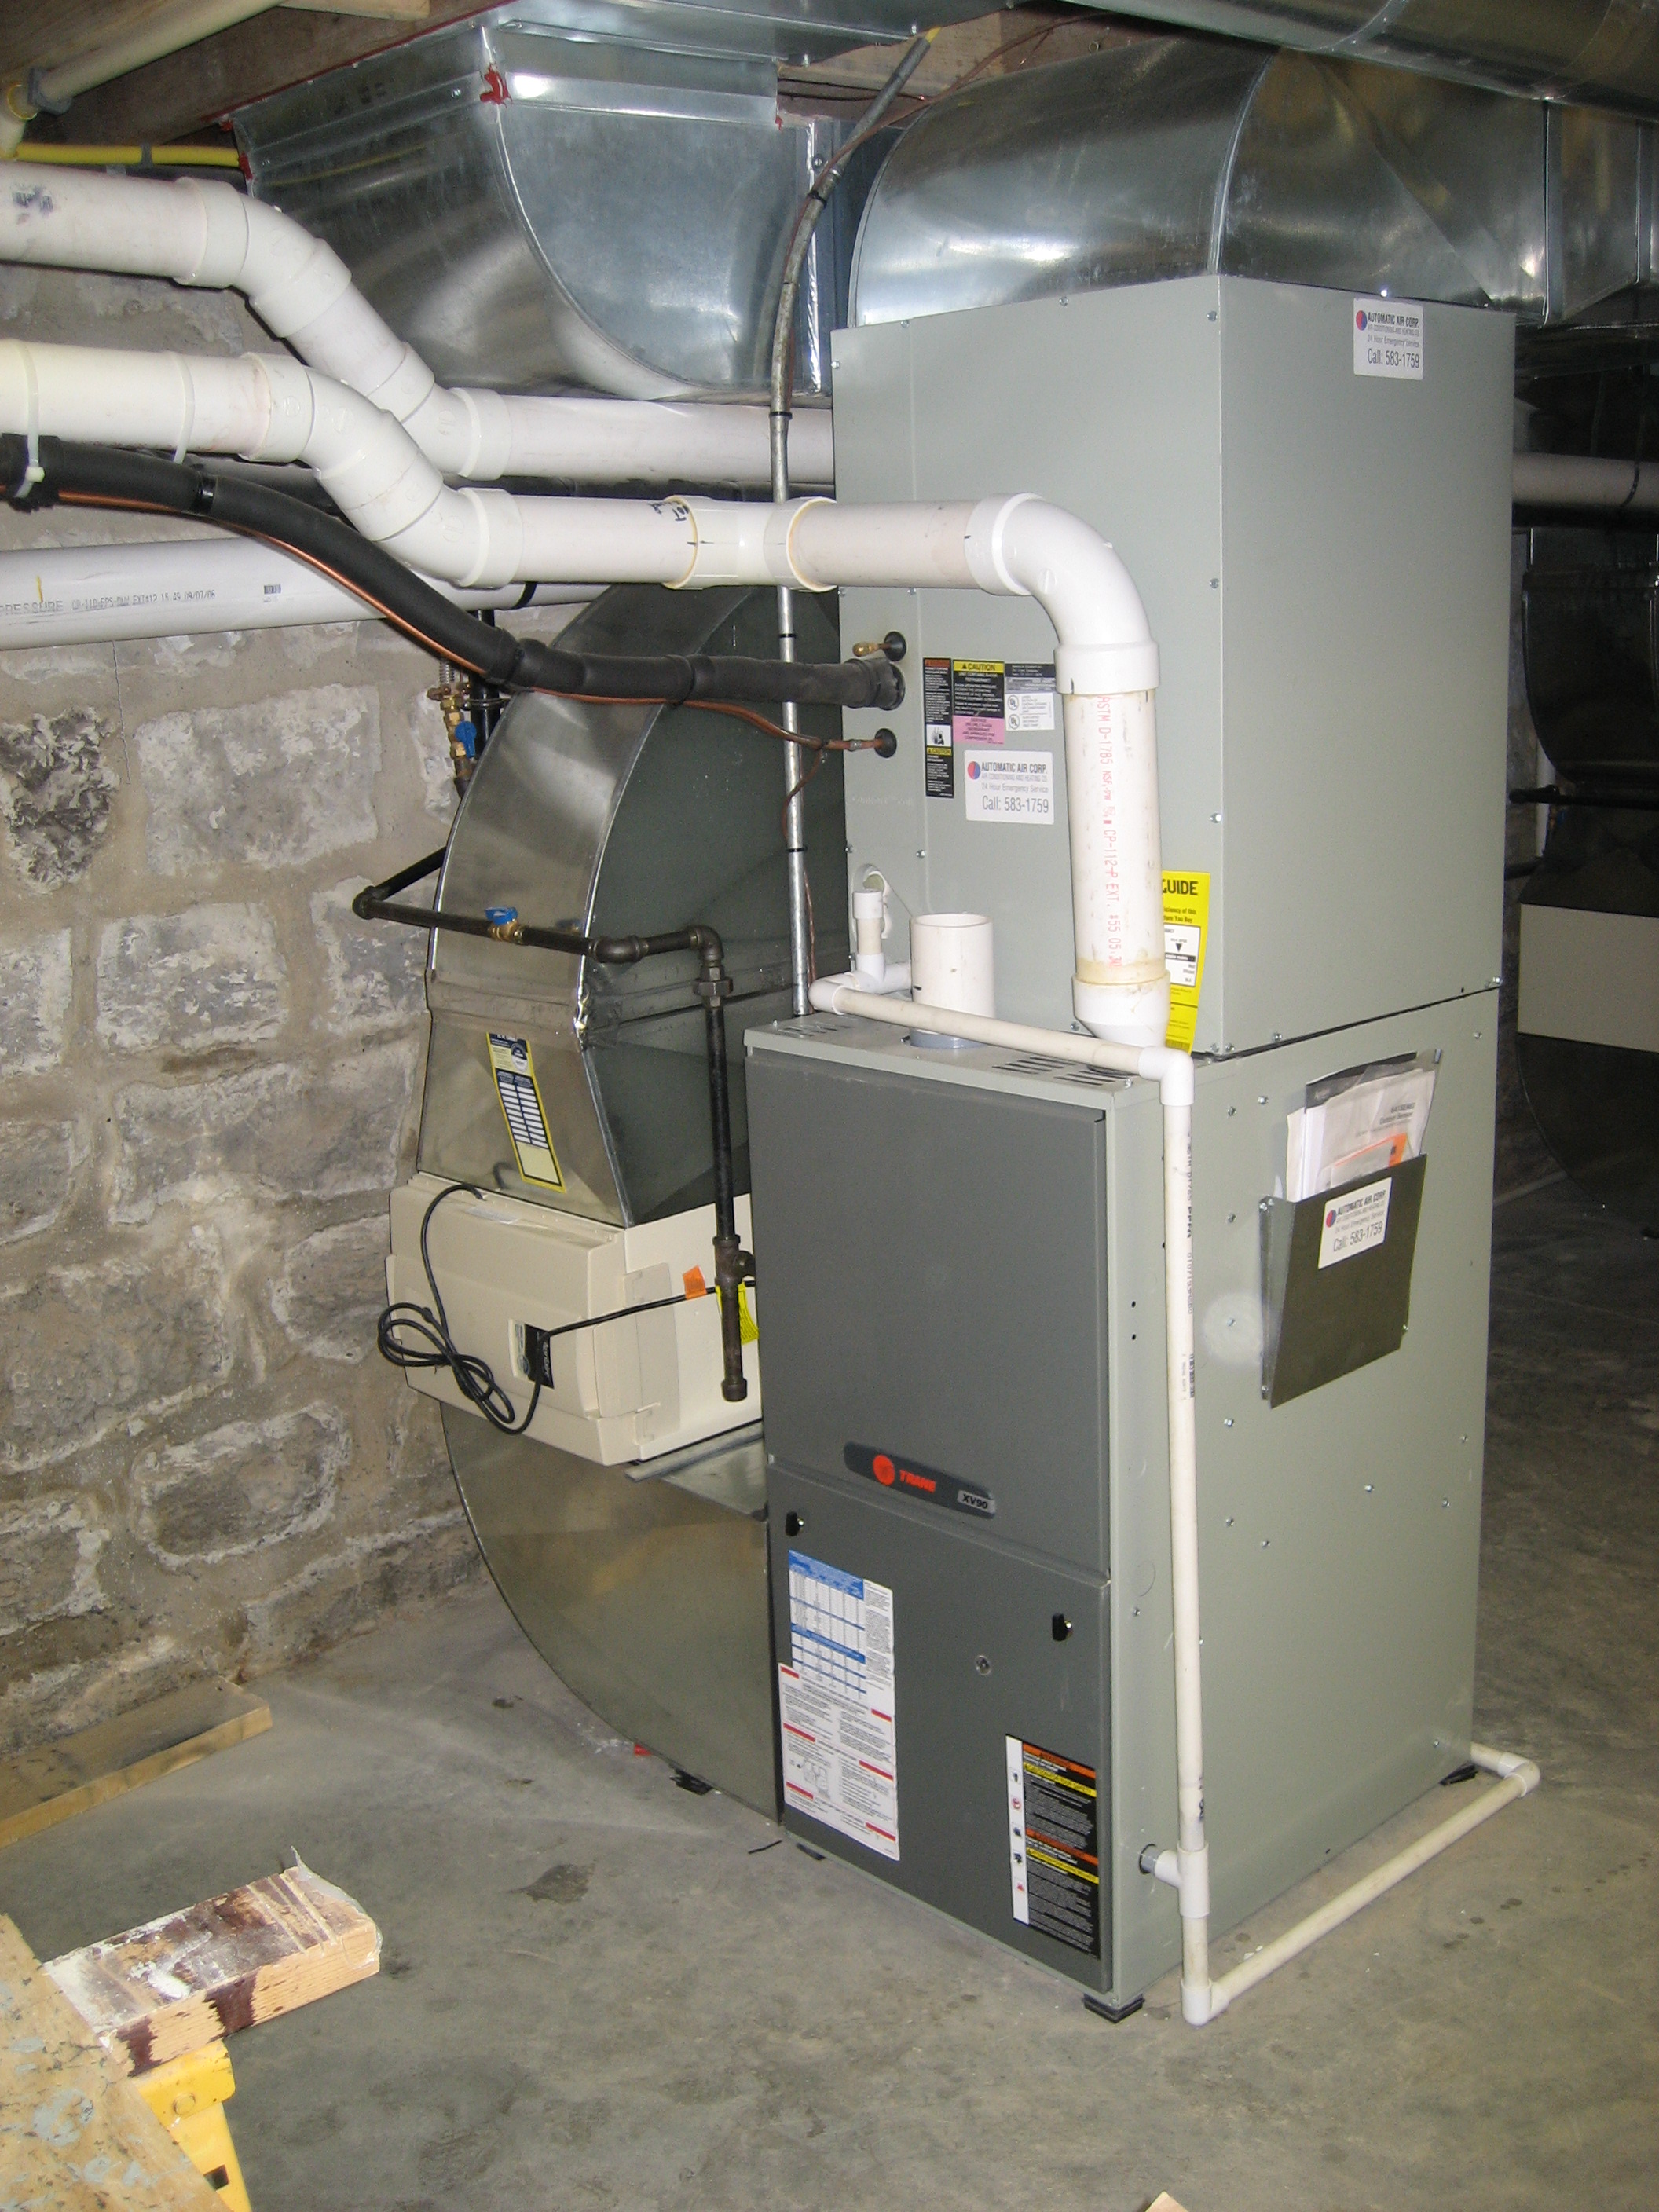 High Efficiency, Electronic Air Cleaner, and Ductwork Installation.JPG